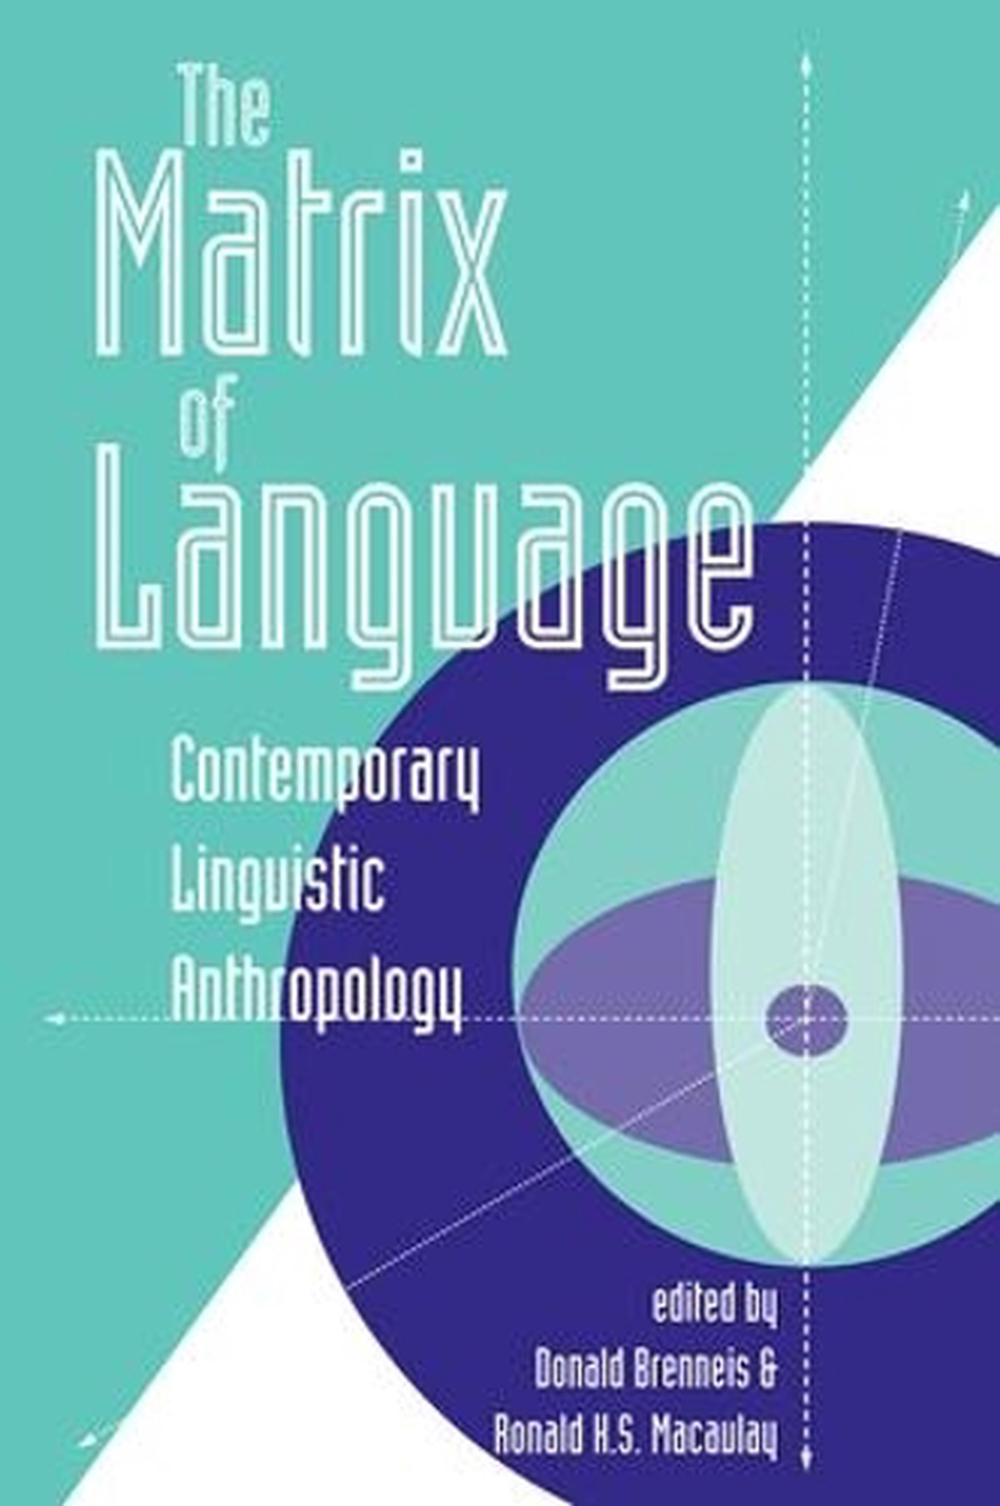 The Matrix of Language: Contemporary Linguistic Anthropology by Donald ...